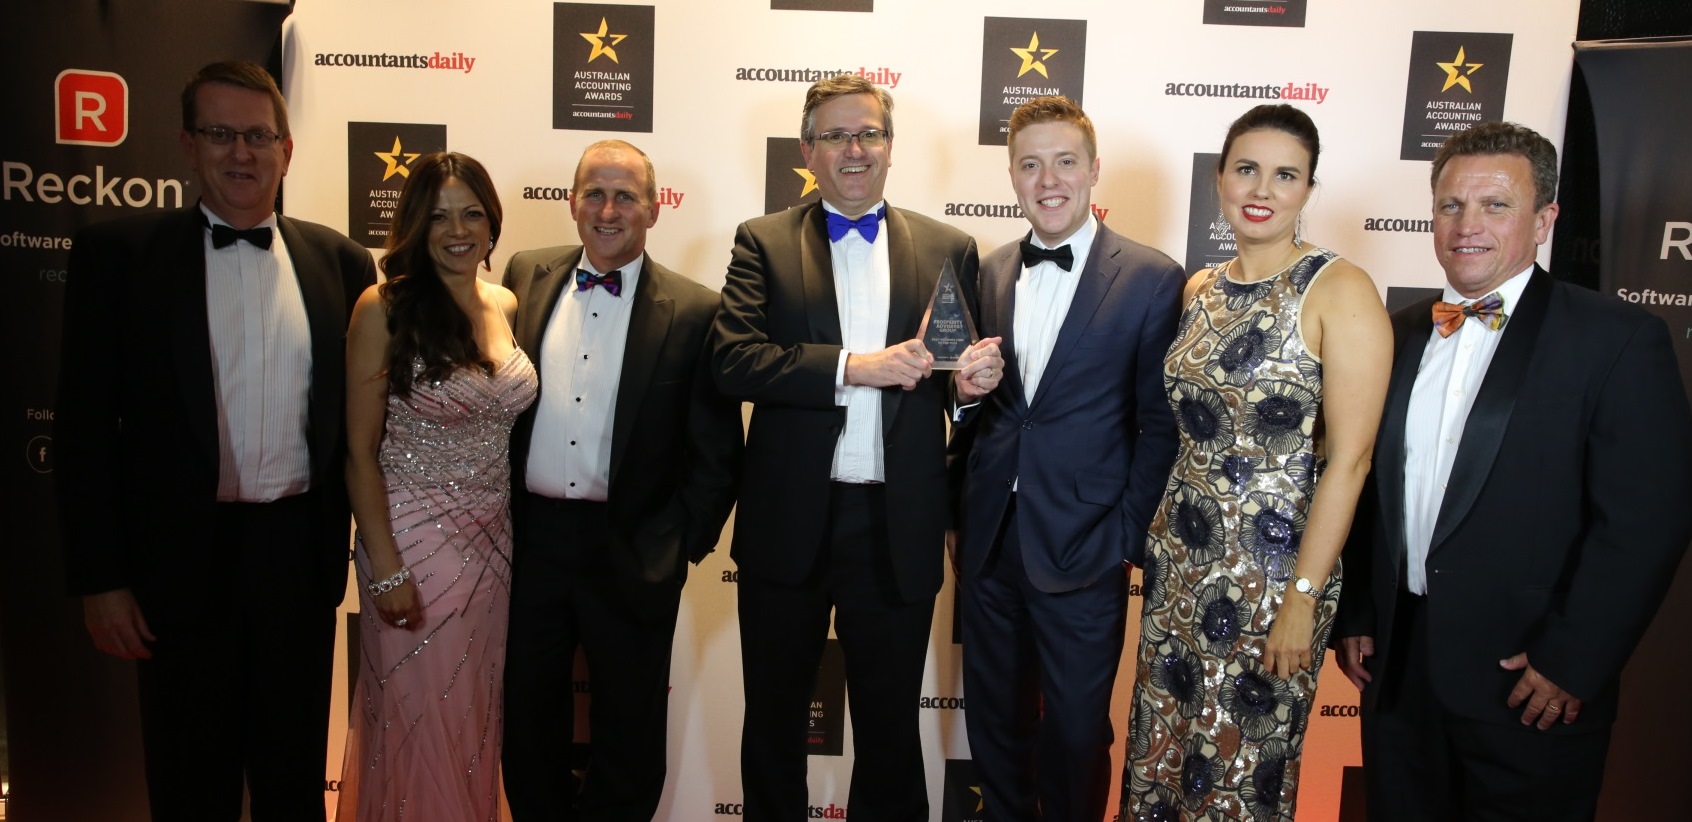 Prosperity feature in Australian Accounting Awards Image